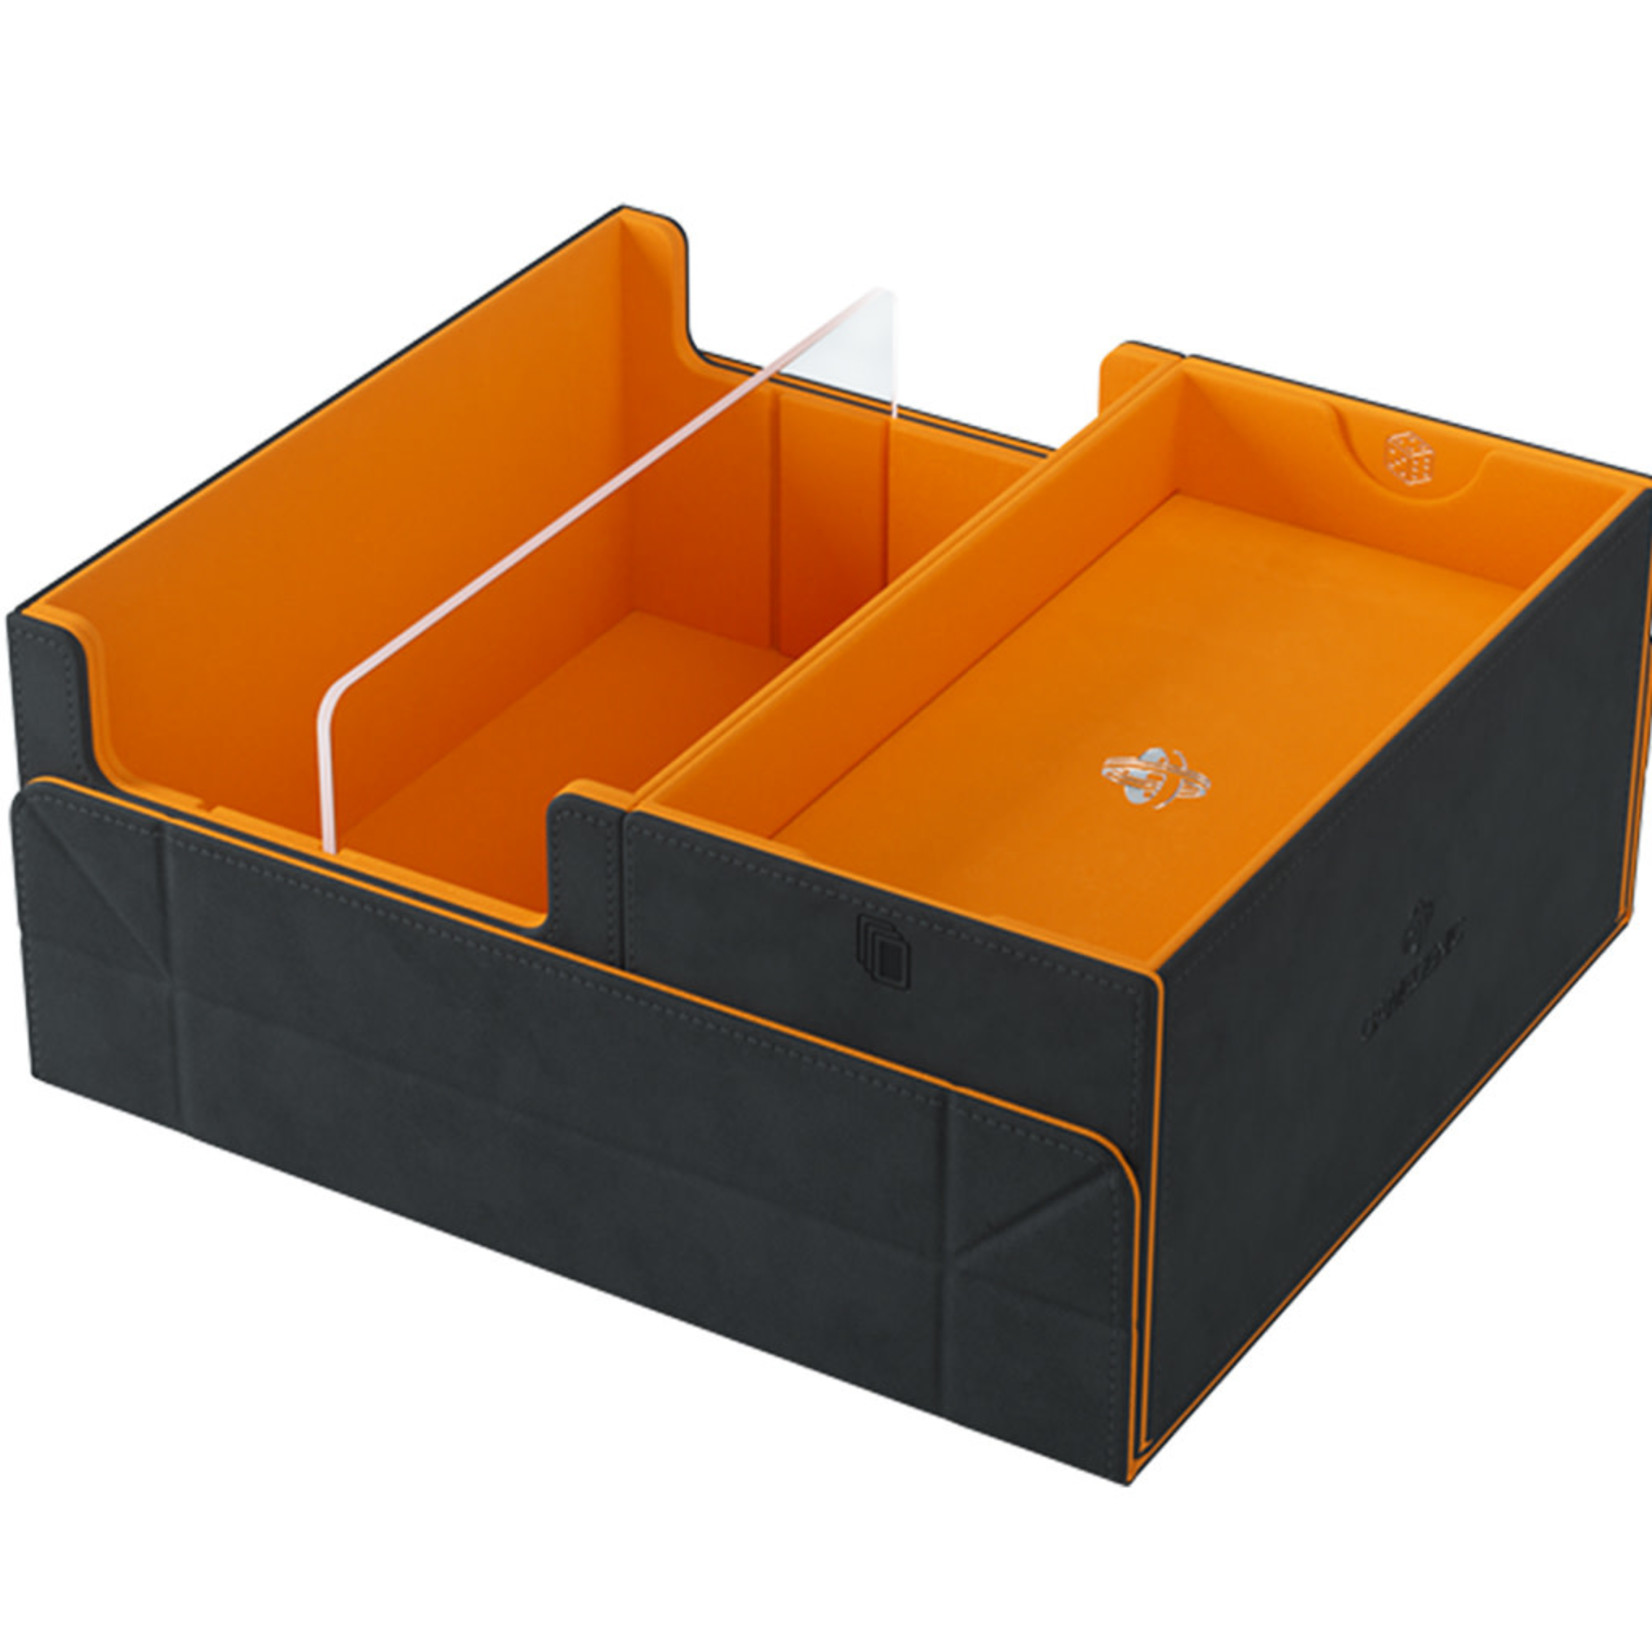 Gamegenic Game's Lair 600+ Convertible Deck Box, Black with Orange